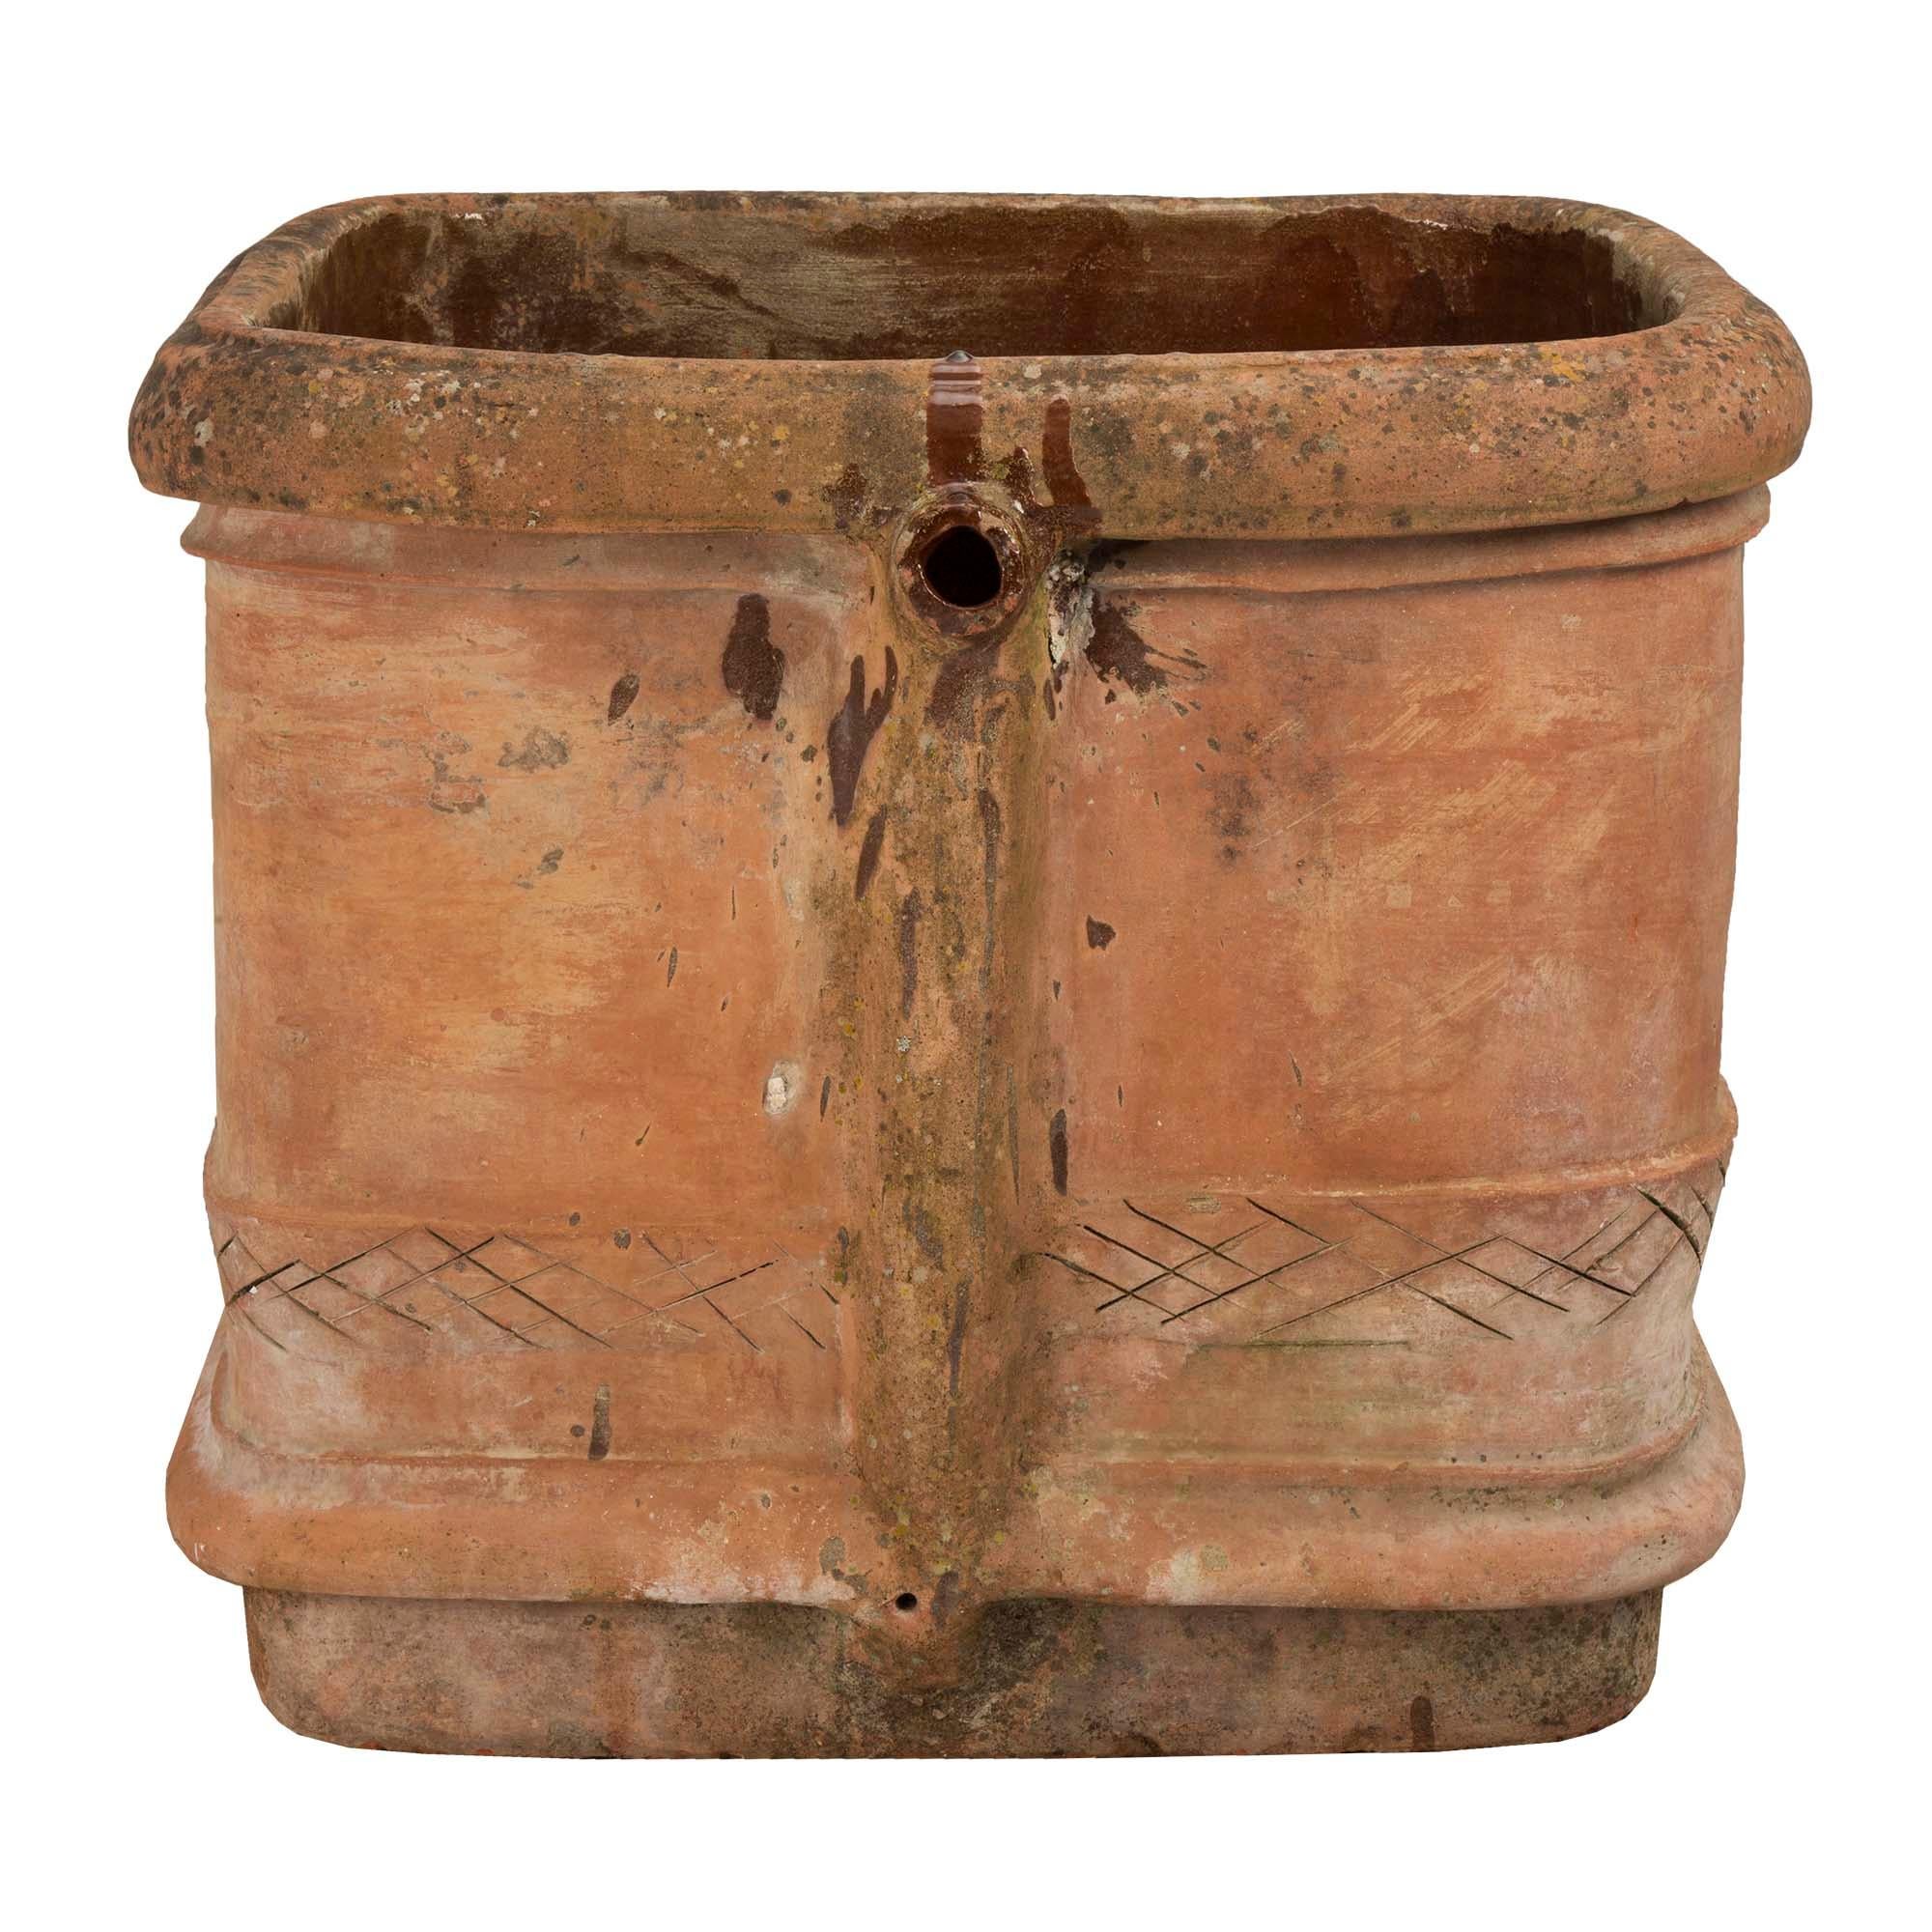 Italian 19th Century Terracotta Planter from Tuscany In Good Condition For Sale In West Palm Beach, FL